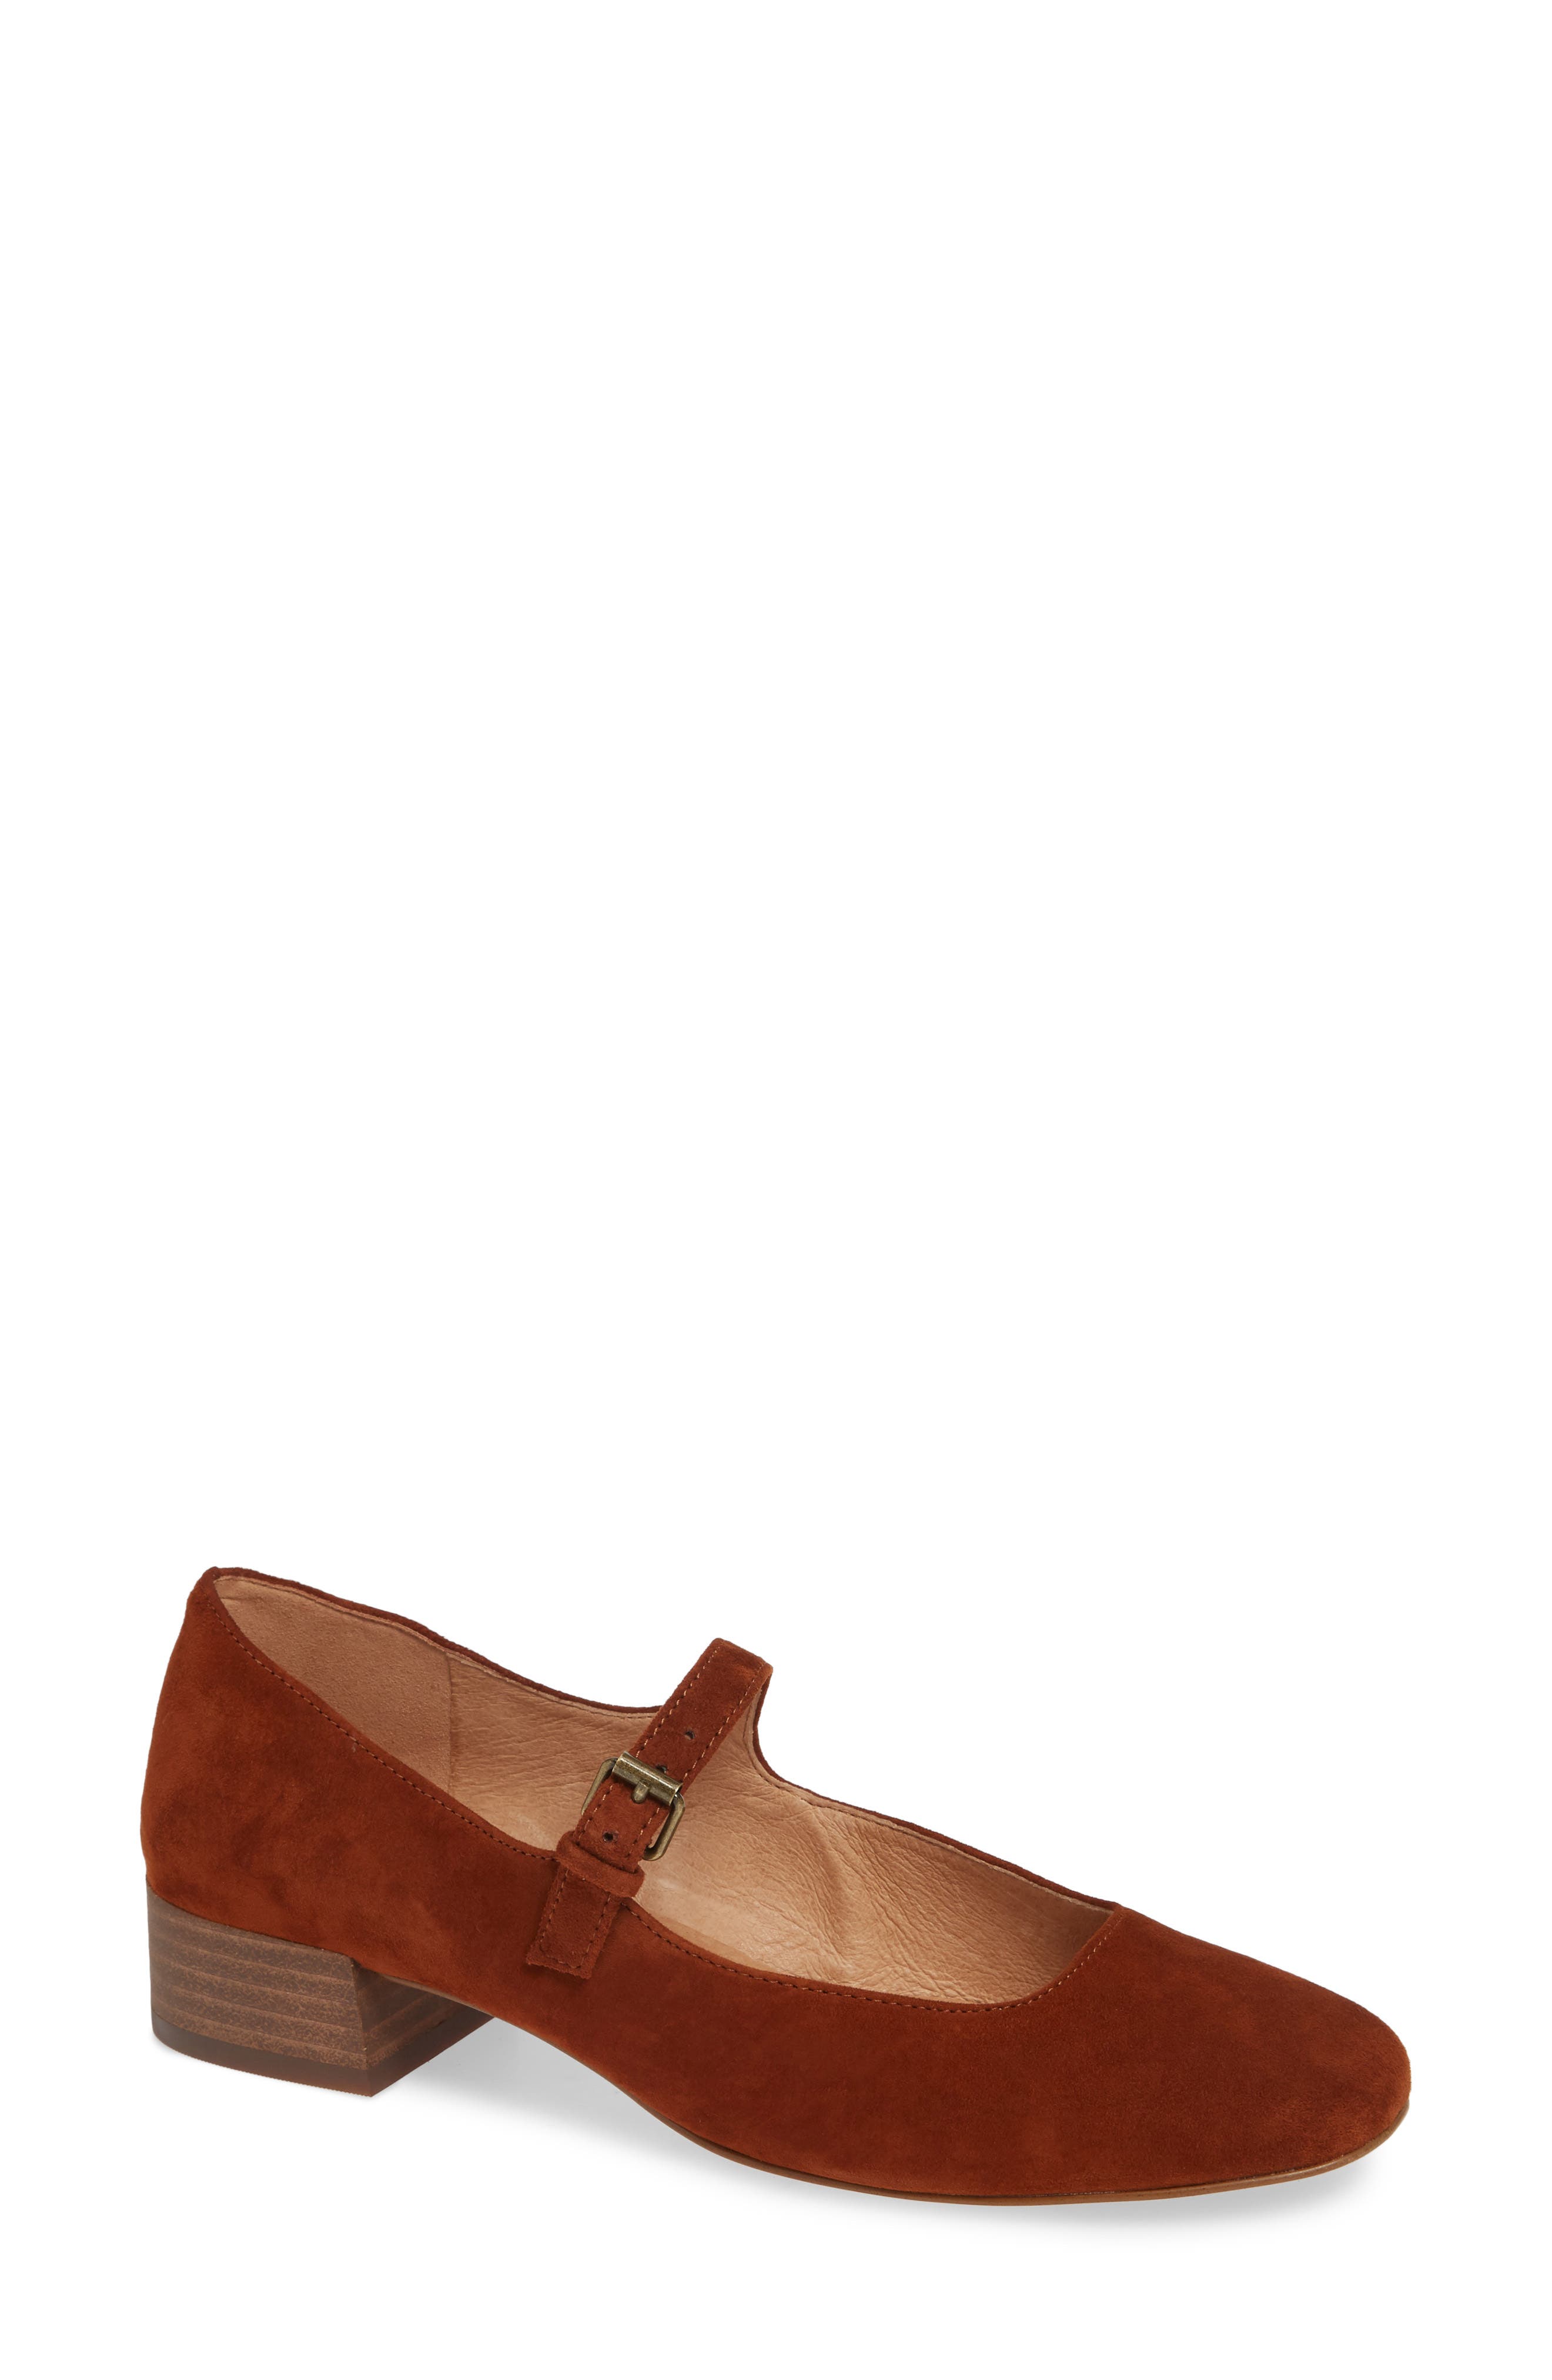 nordstrom mary jane shoes